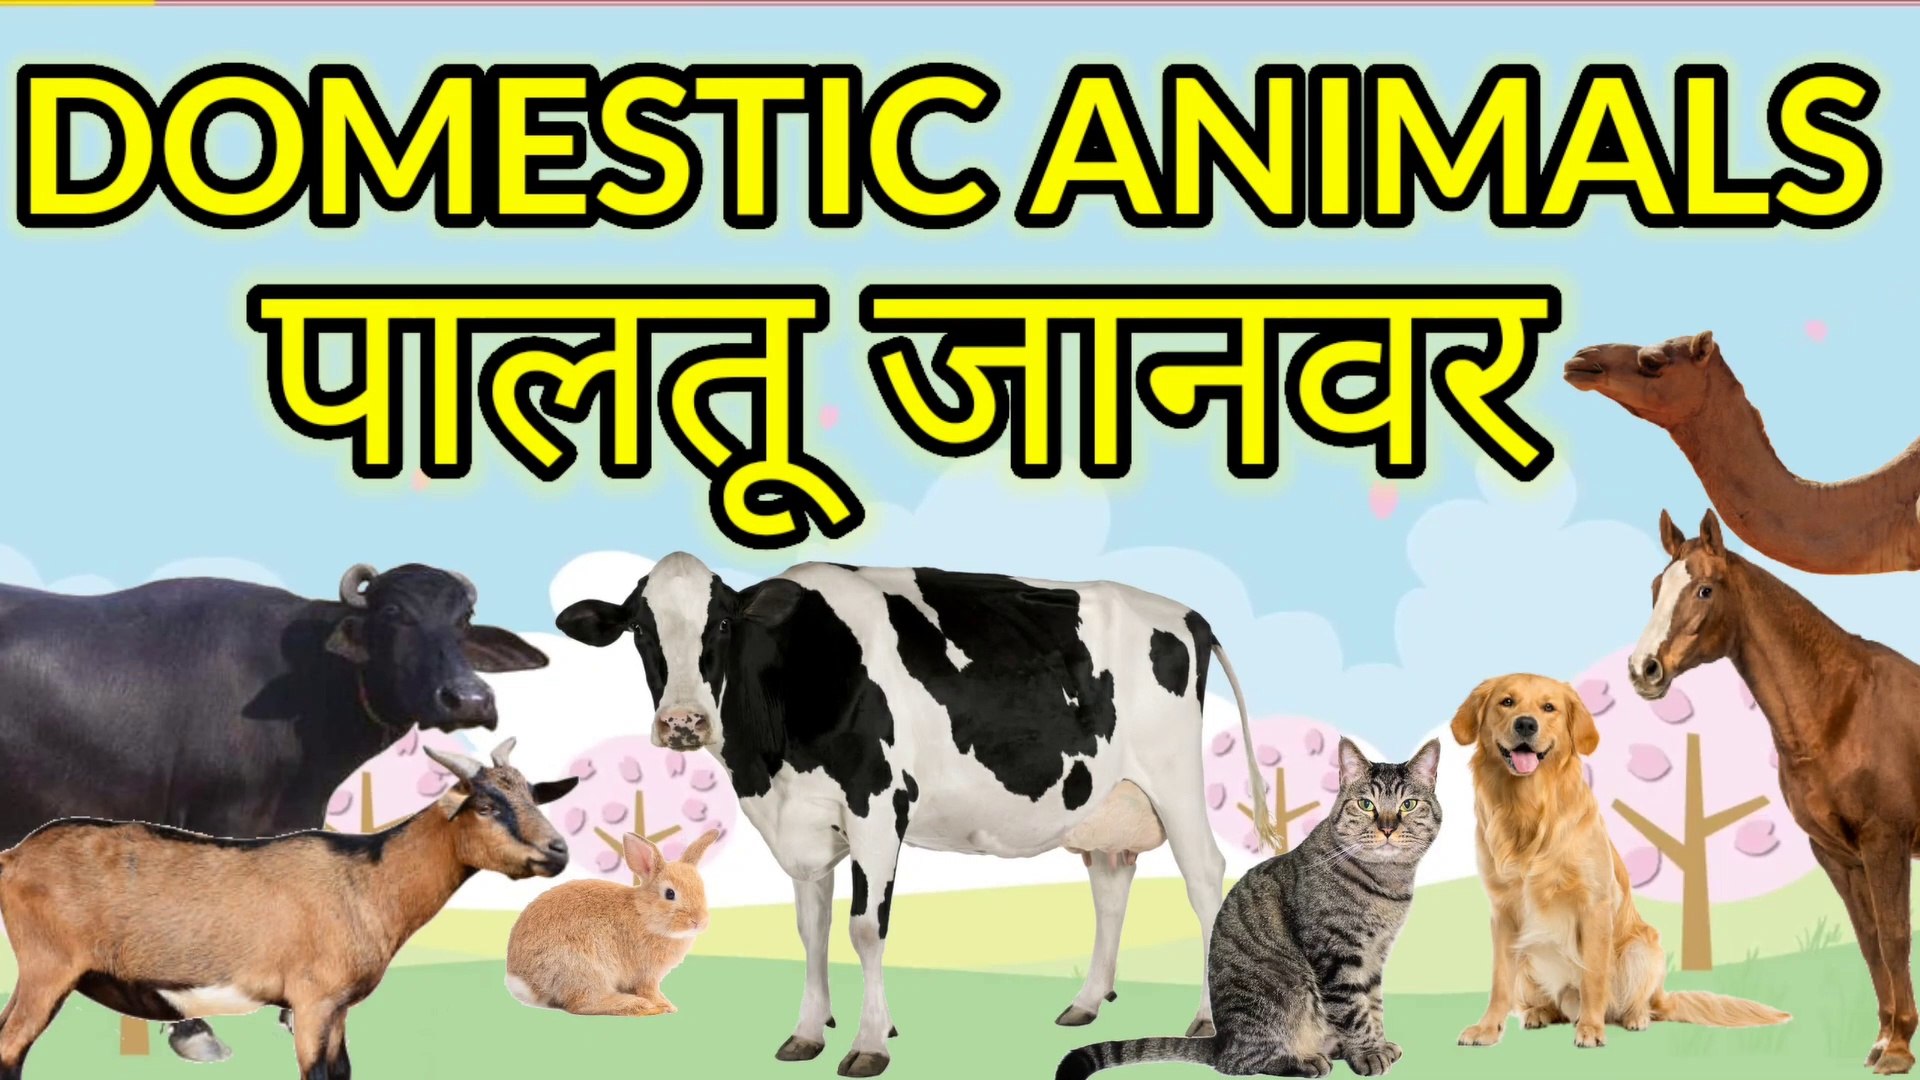 Learn Domestic Animal Names || Farm Animals for Kids in English and Hindi  || पालतू जानवरों के नाम Kids! Let's Meet Domestic Animals - Cow, Buffalo,  Cat, Dog, Hen, Camel, Donkey, Goat,